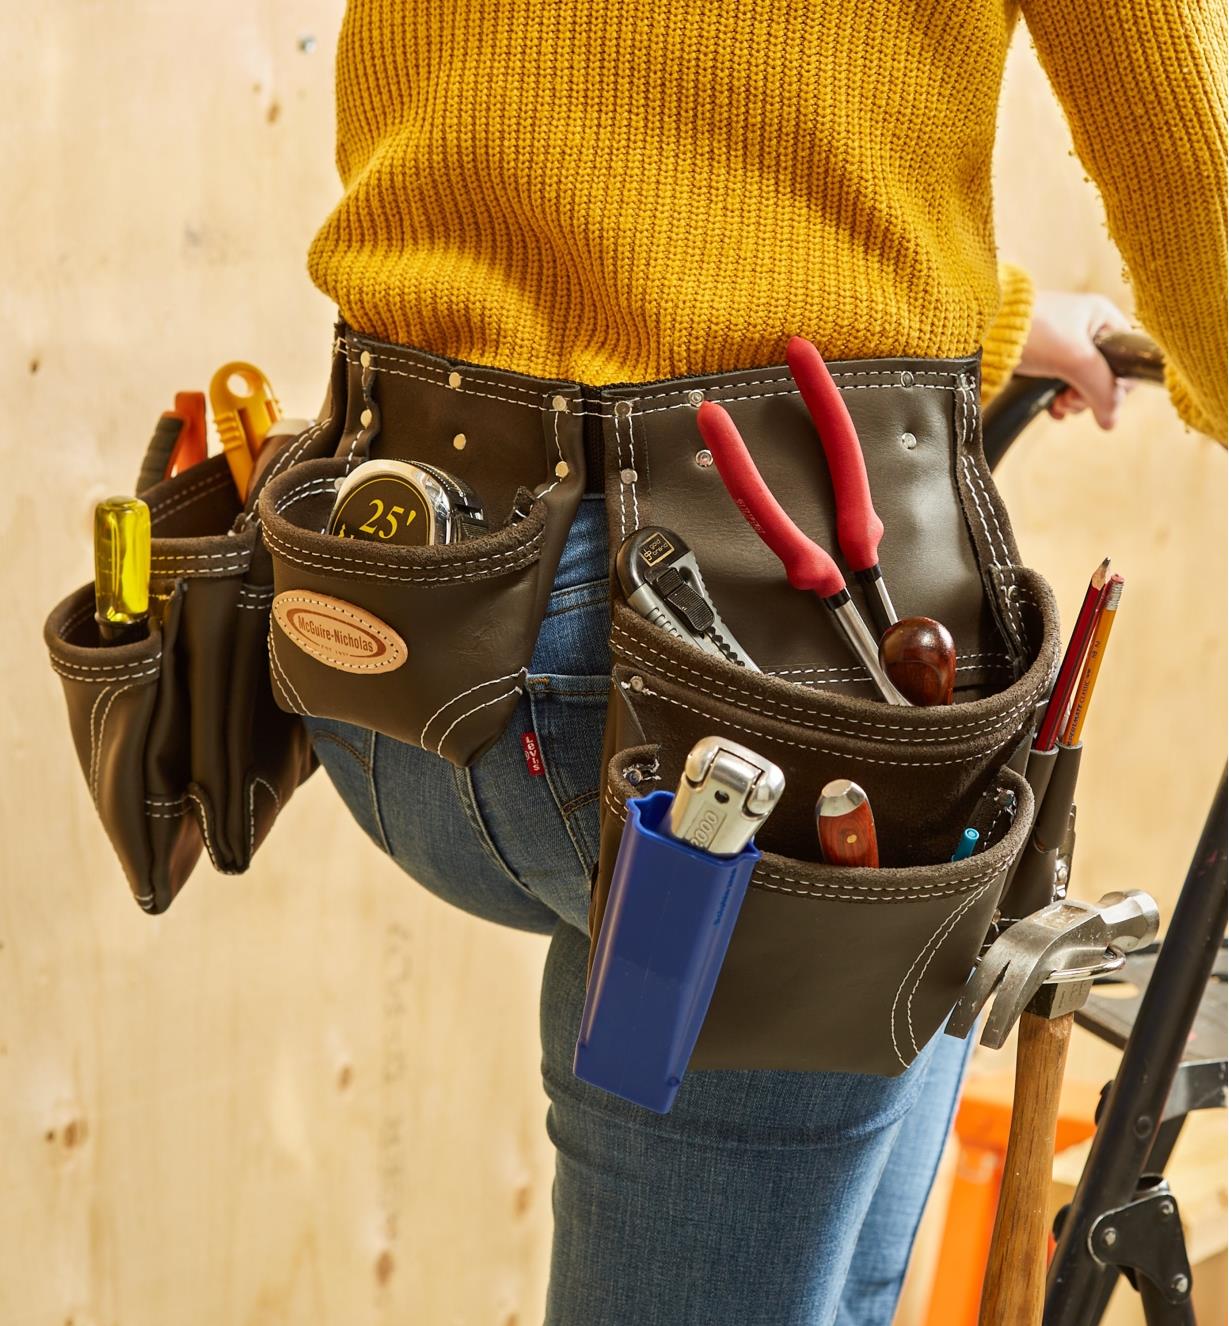 A person wearing a McGuire-Nicholas standard carpenter’s apron filled with tools